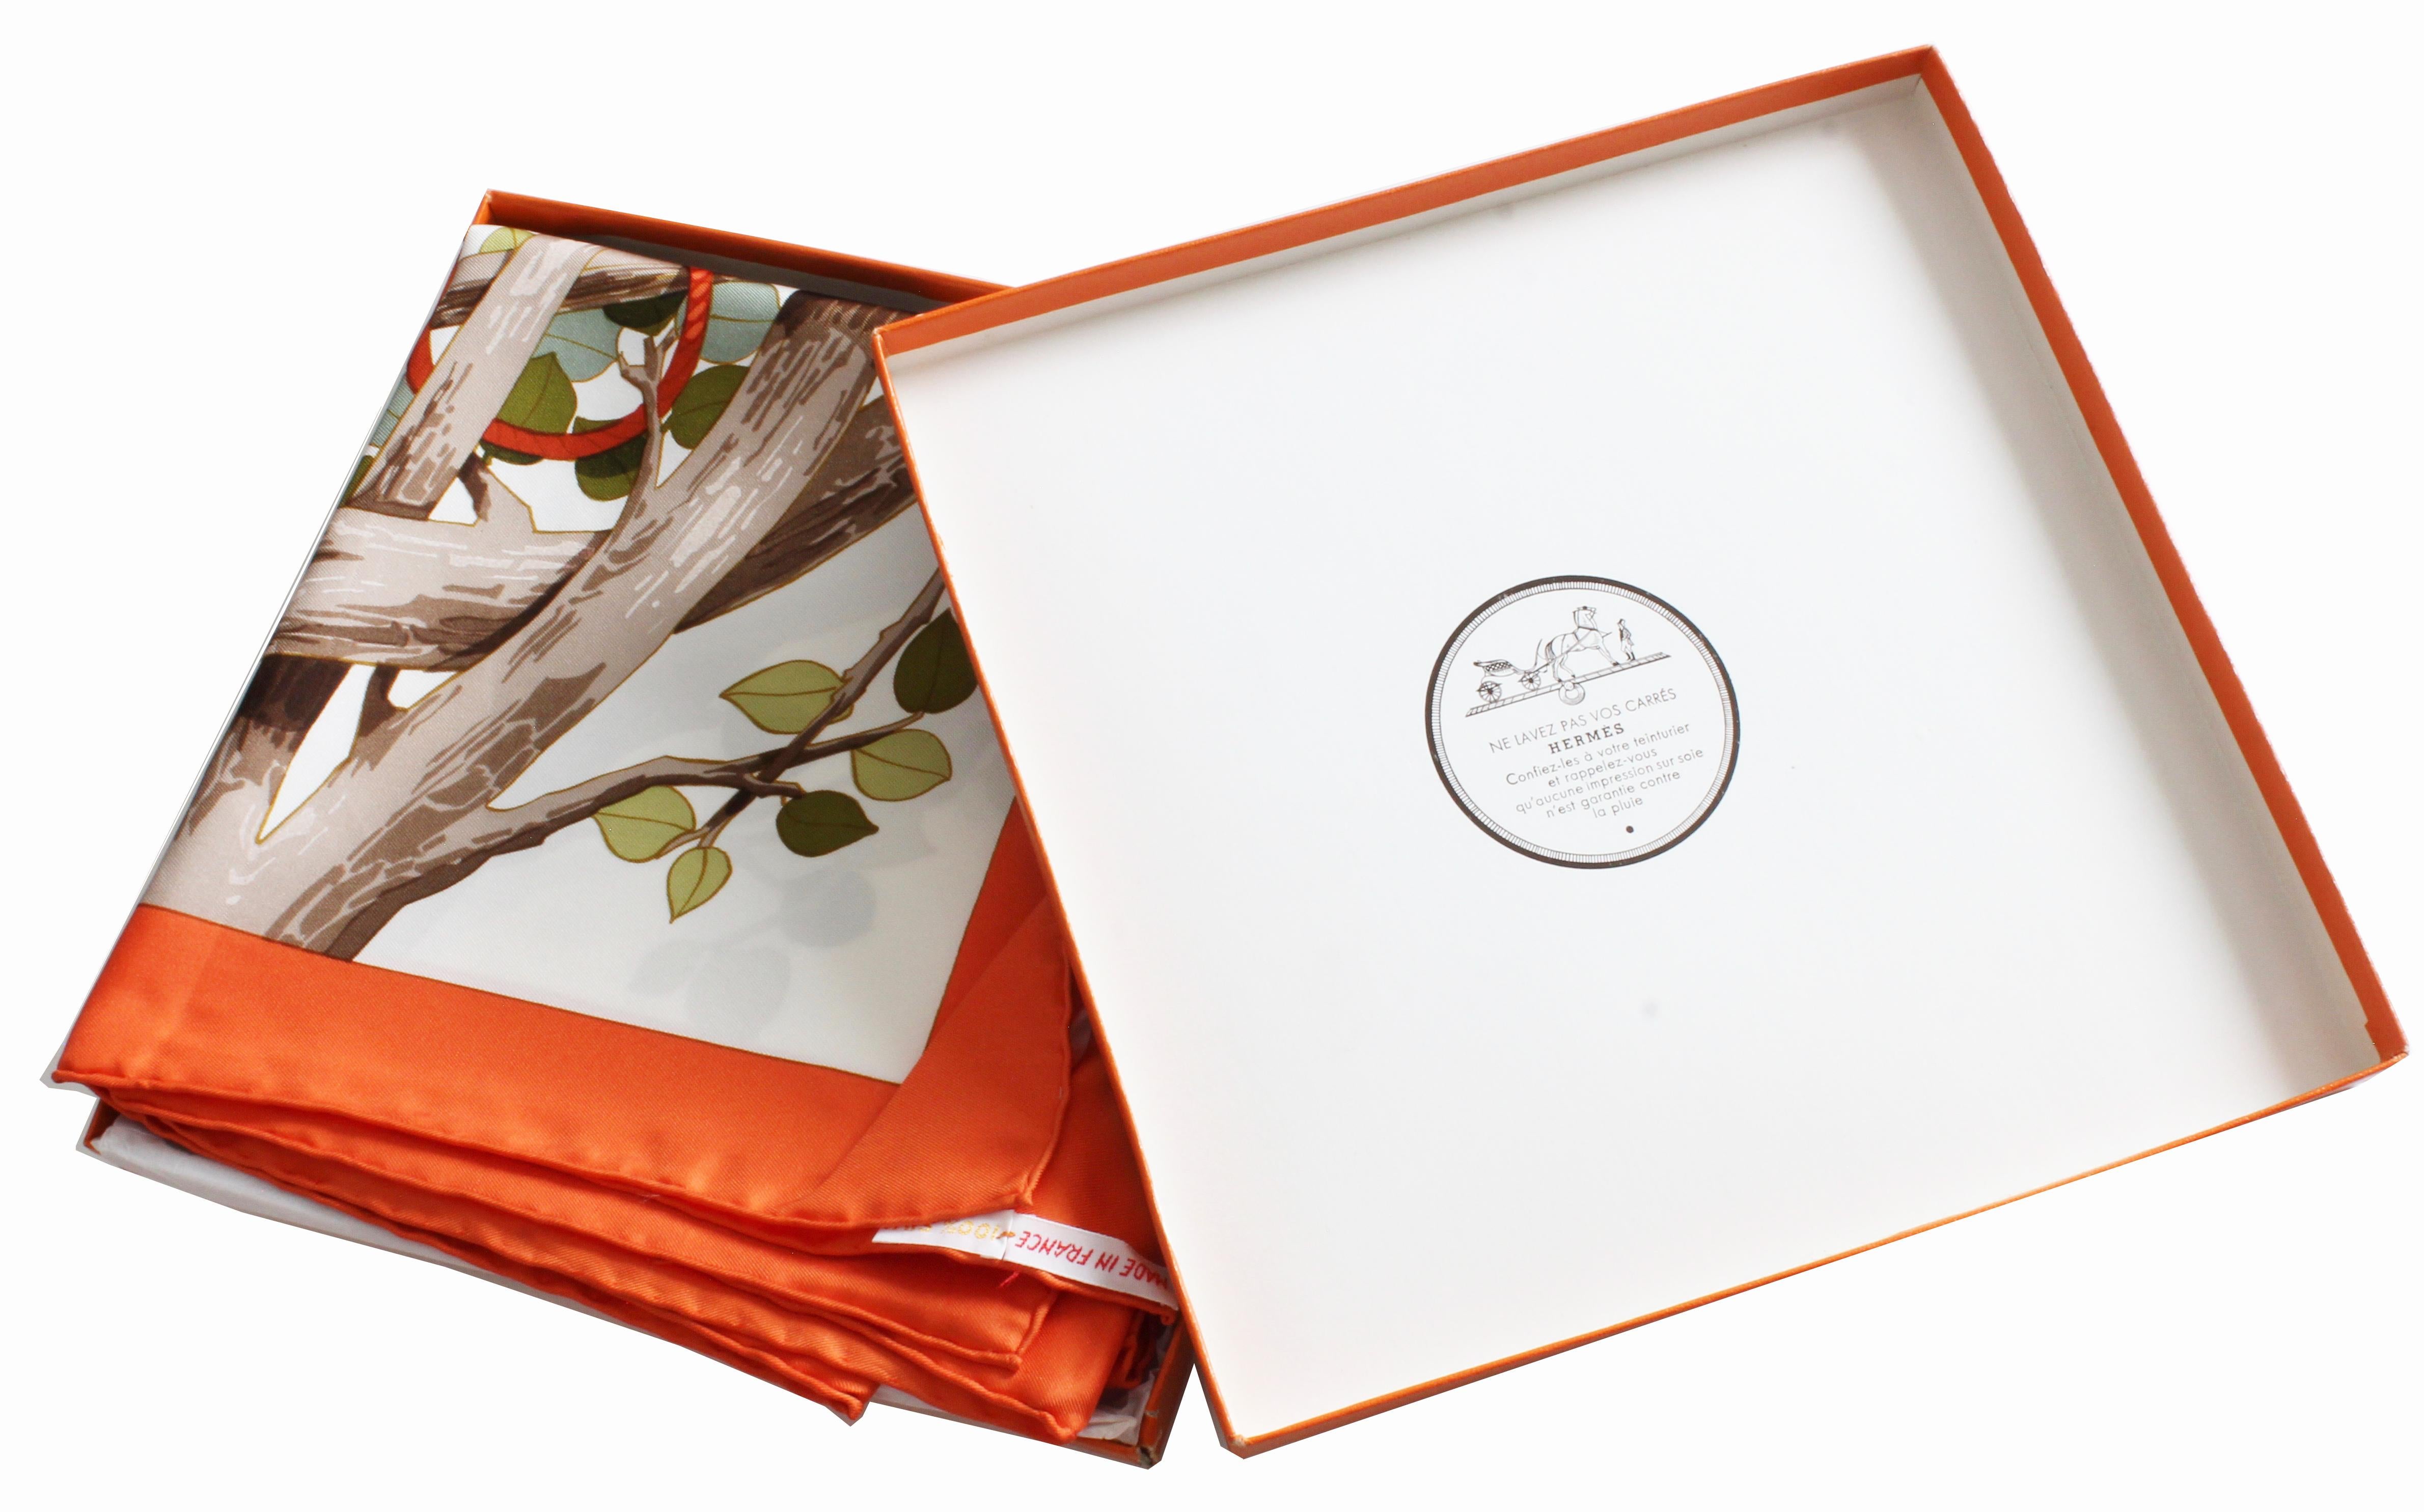 Hermes  Silk Twill Scarf  by Francoise Heron Sous-Bois 90cm in Box 11